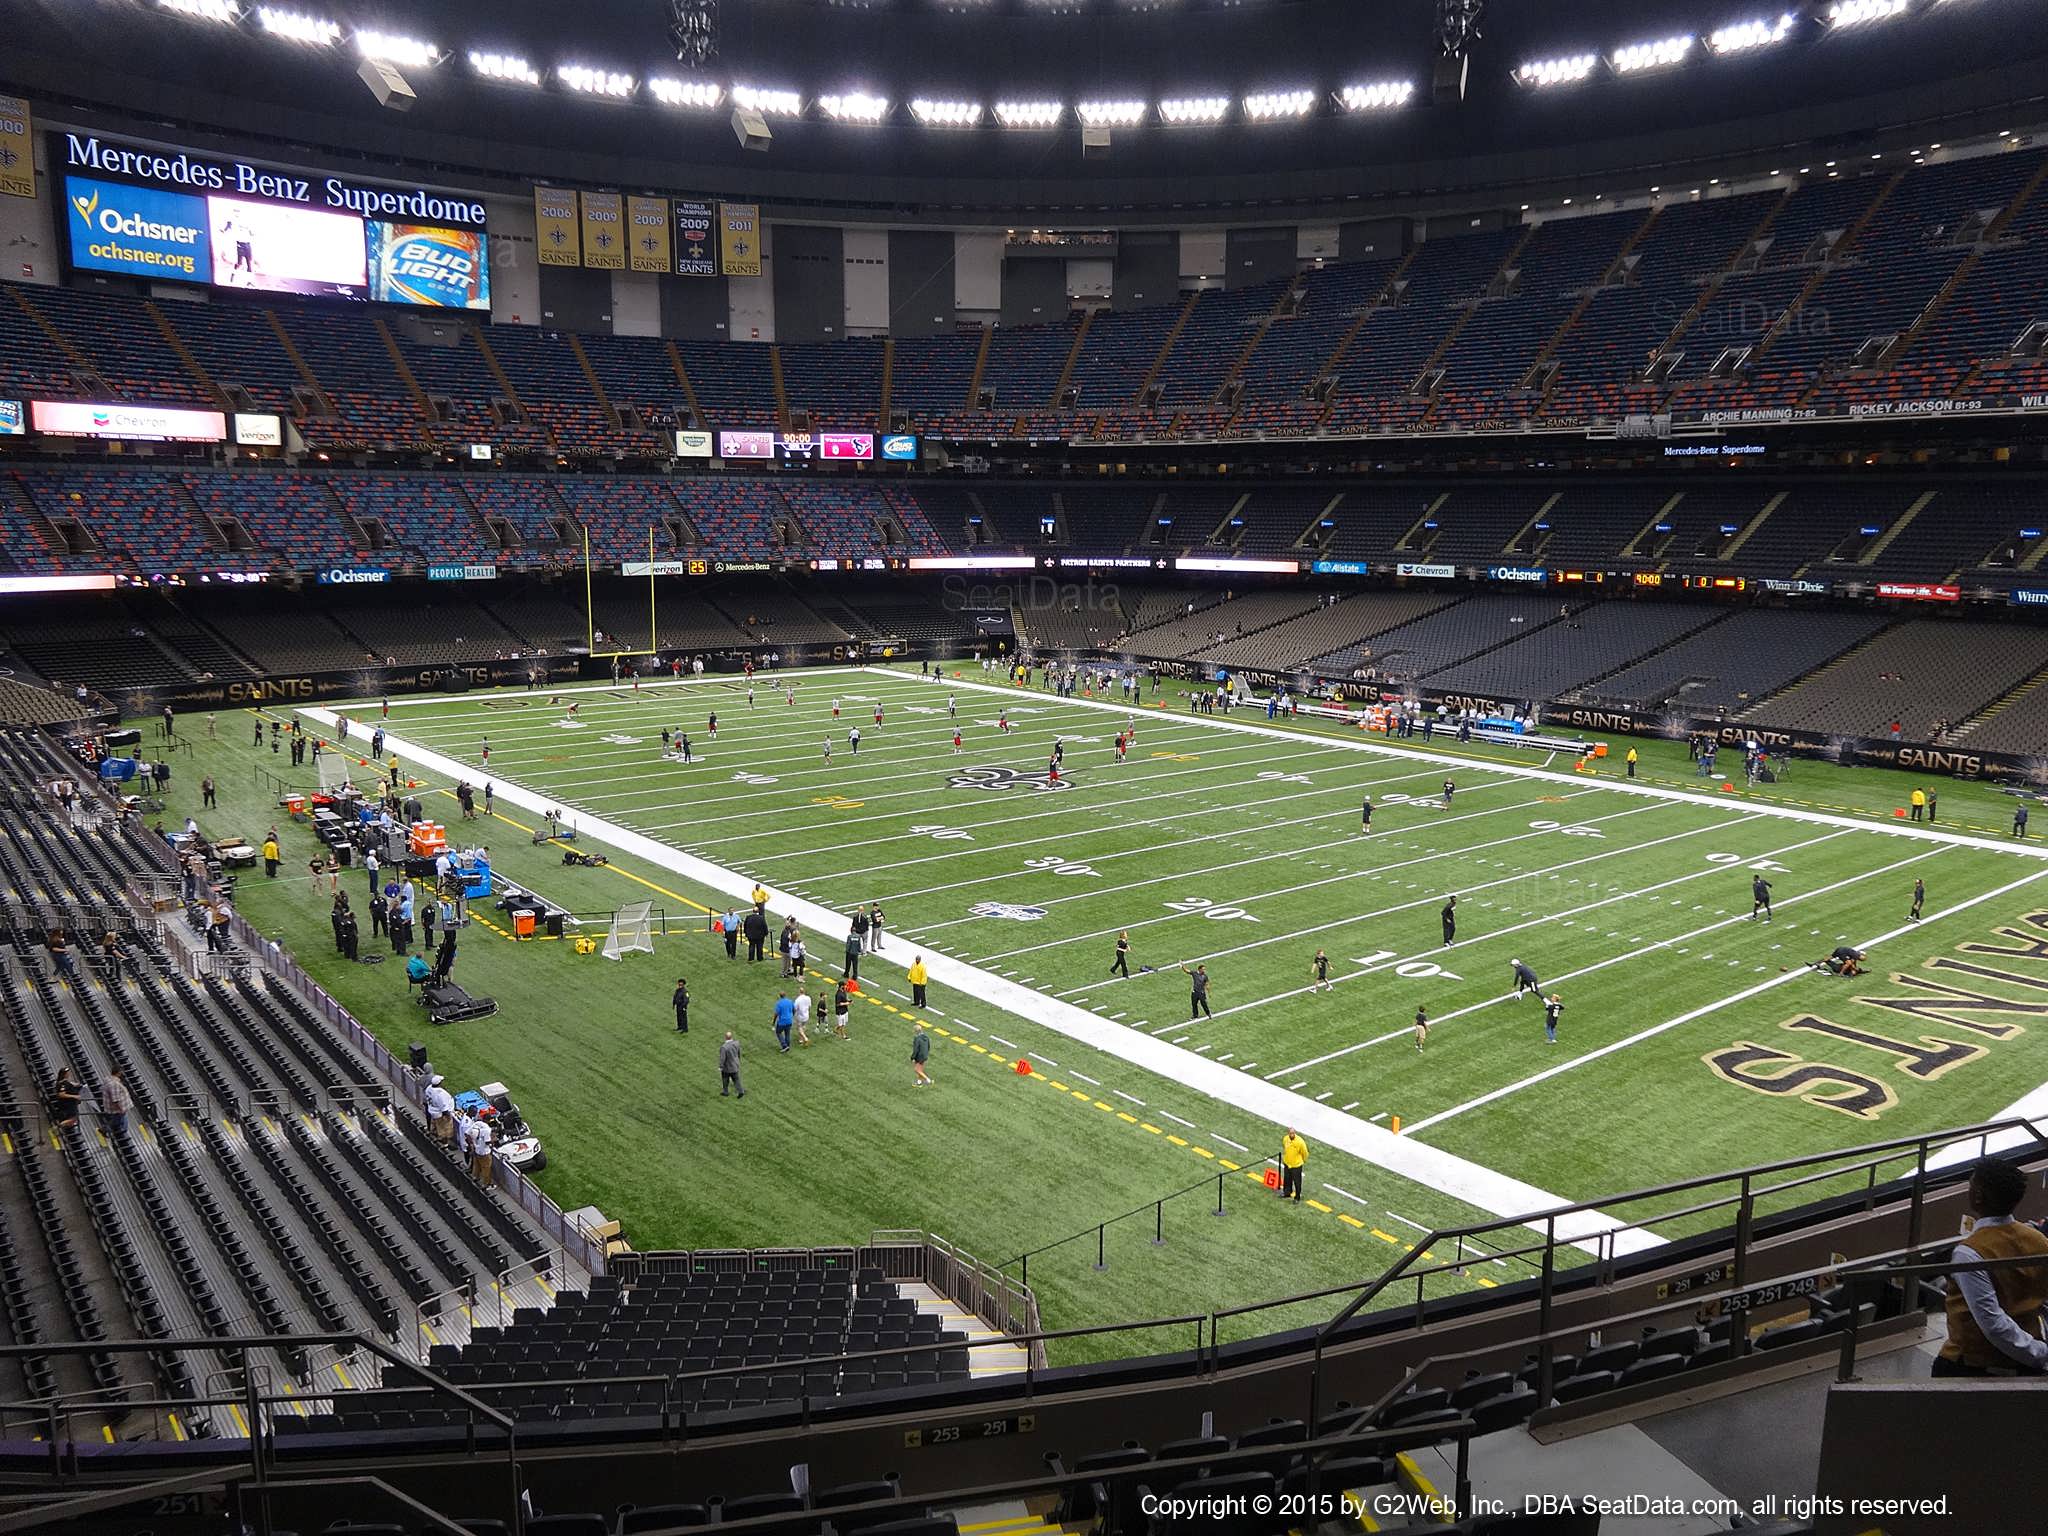 Seat view from section 329 at the Mercedes-Benz Superdome, home of the New Orleans Saints